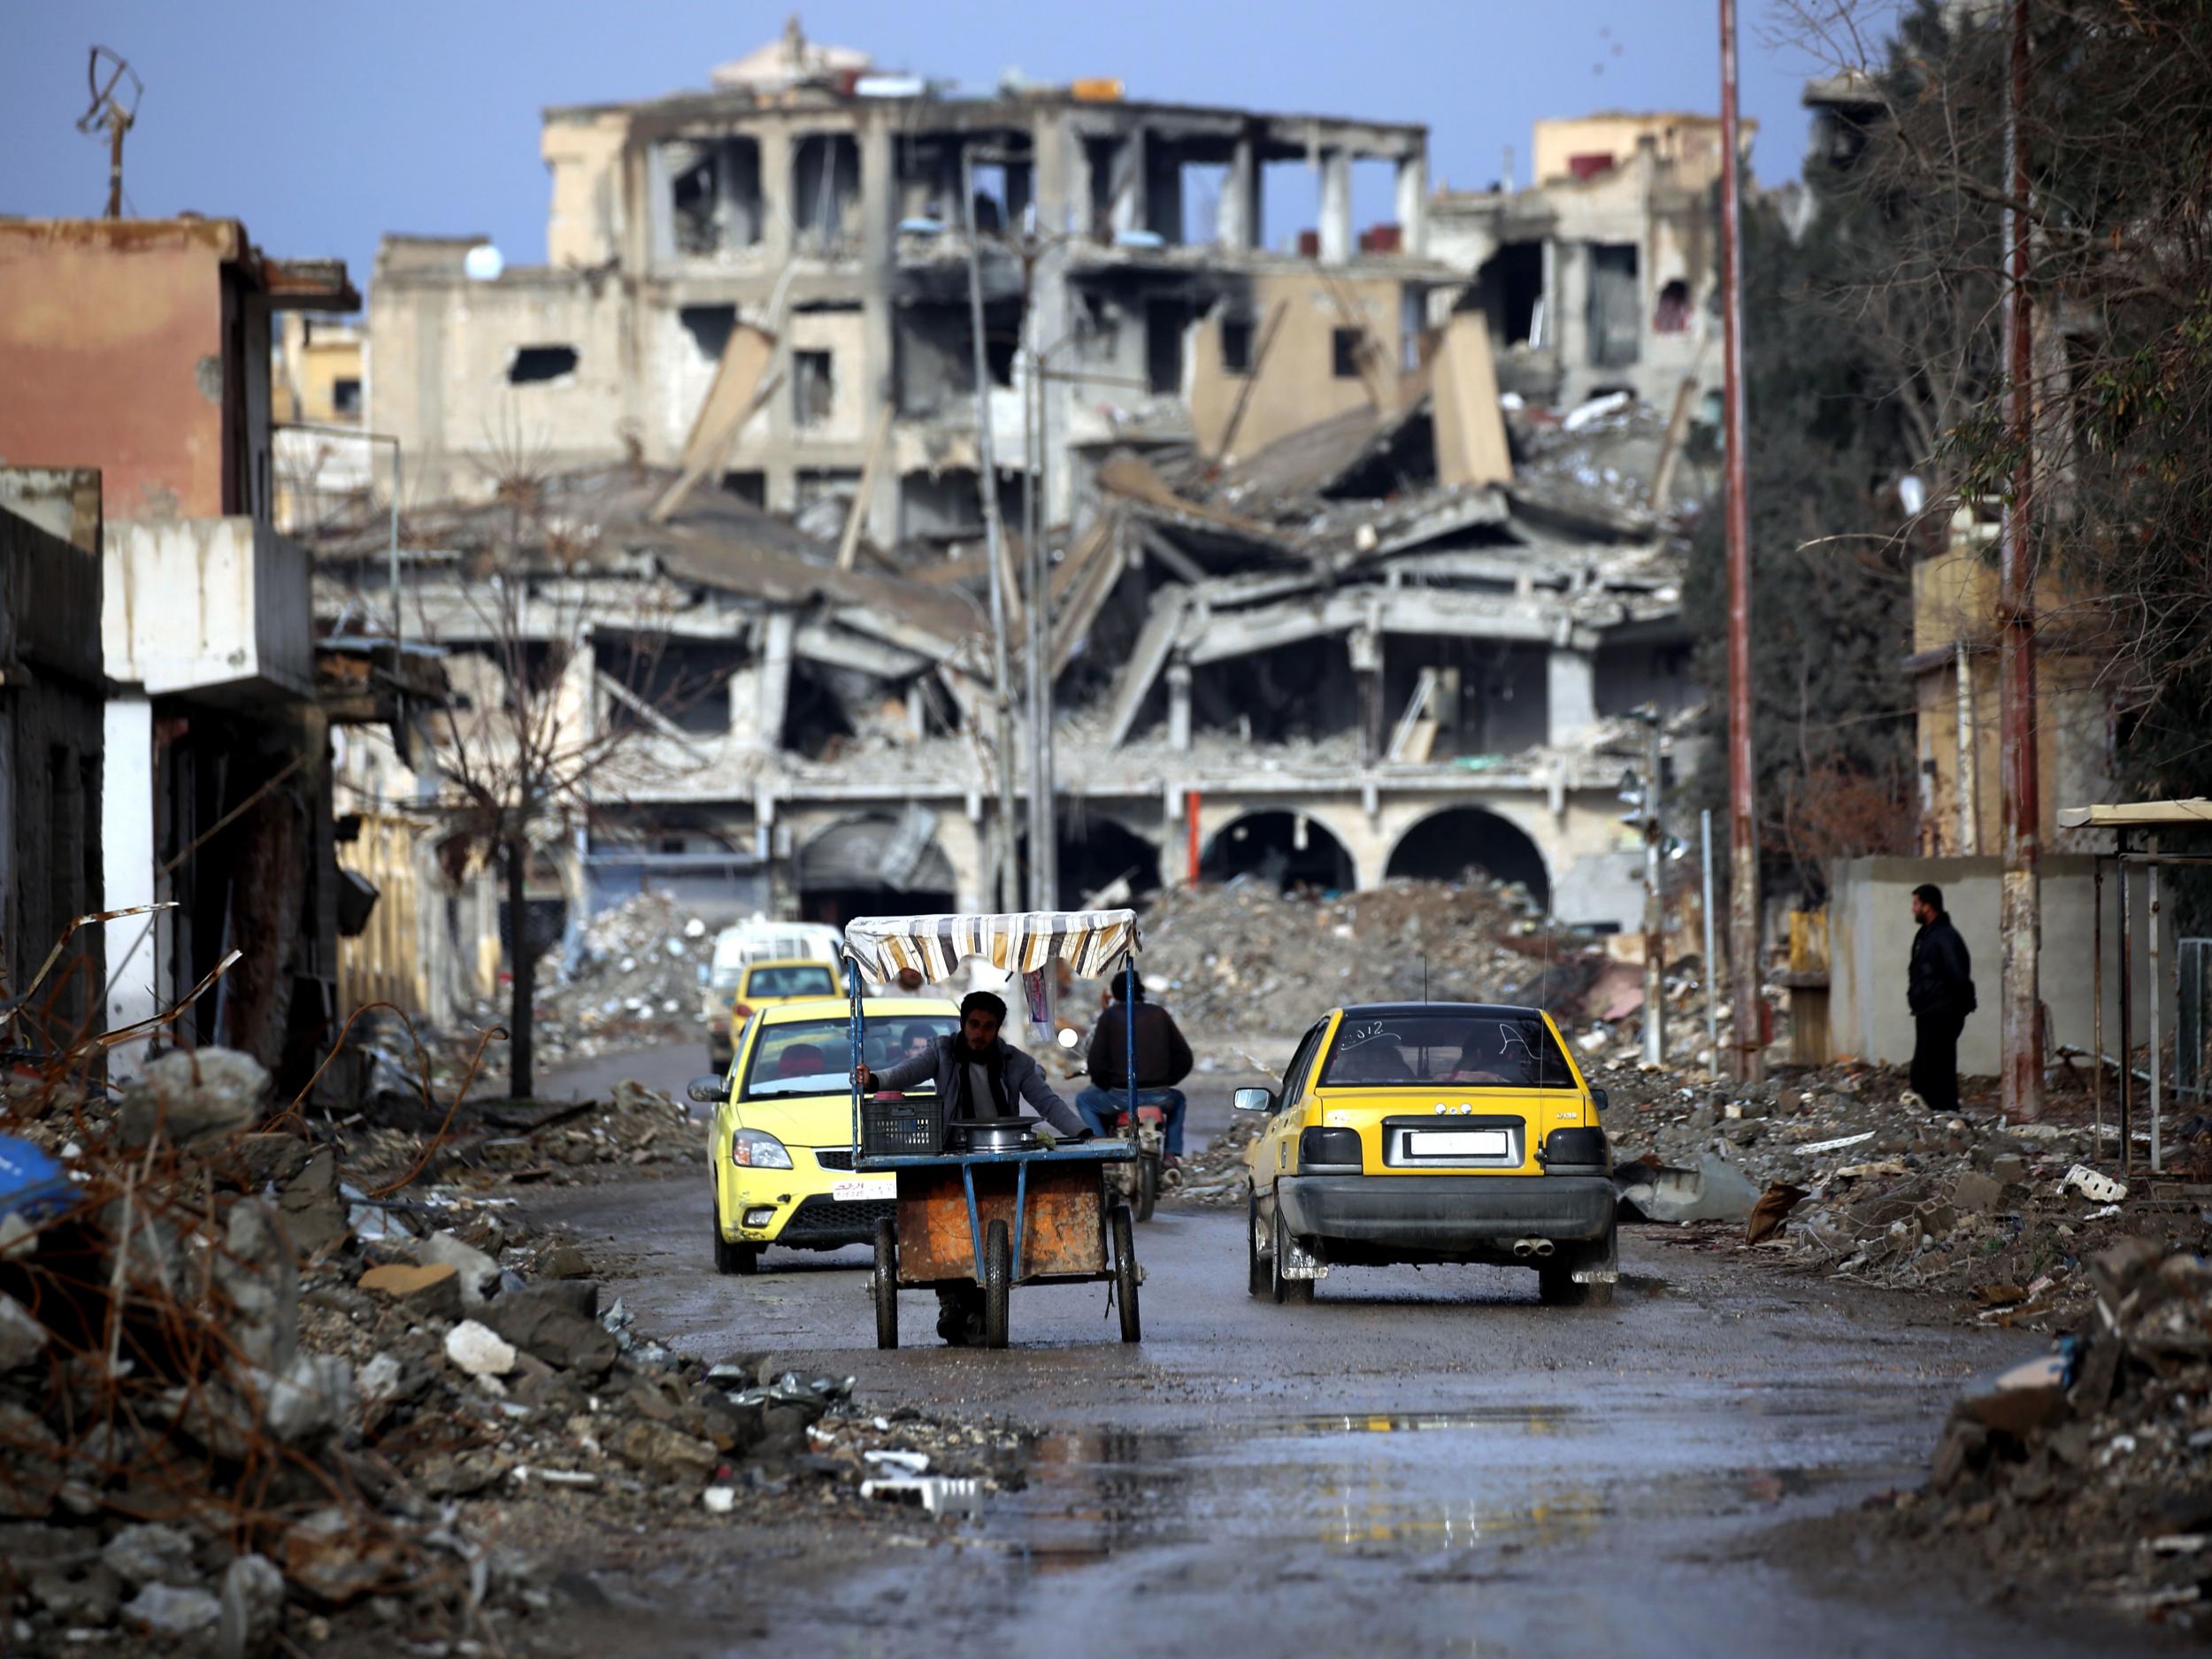 Syria is one of the countries to have been devastated by war in recent years